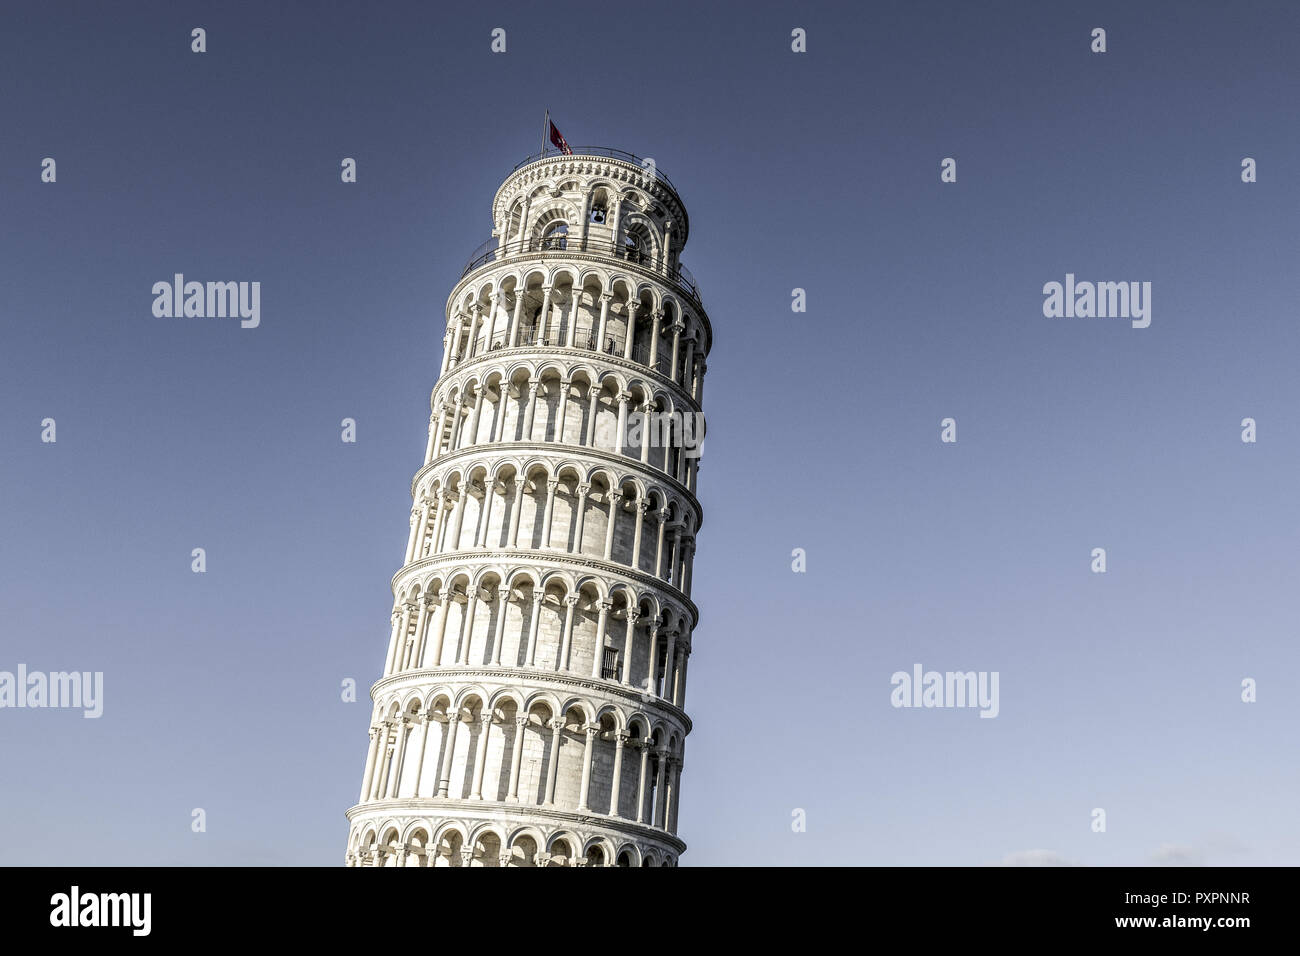 Campanile, Leaning Tower of Pisa, Pizza del Miracoli, Pisa, Province of Pisa, Tuscany, Italy, Europe Stock Photo